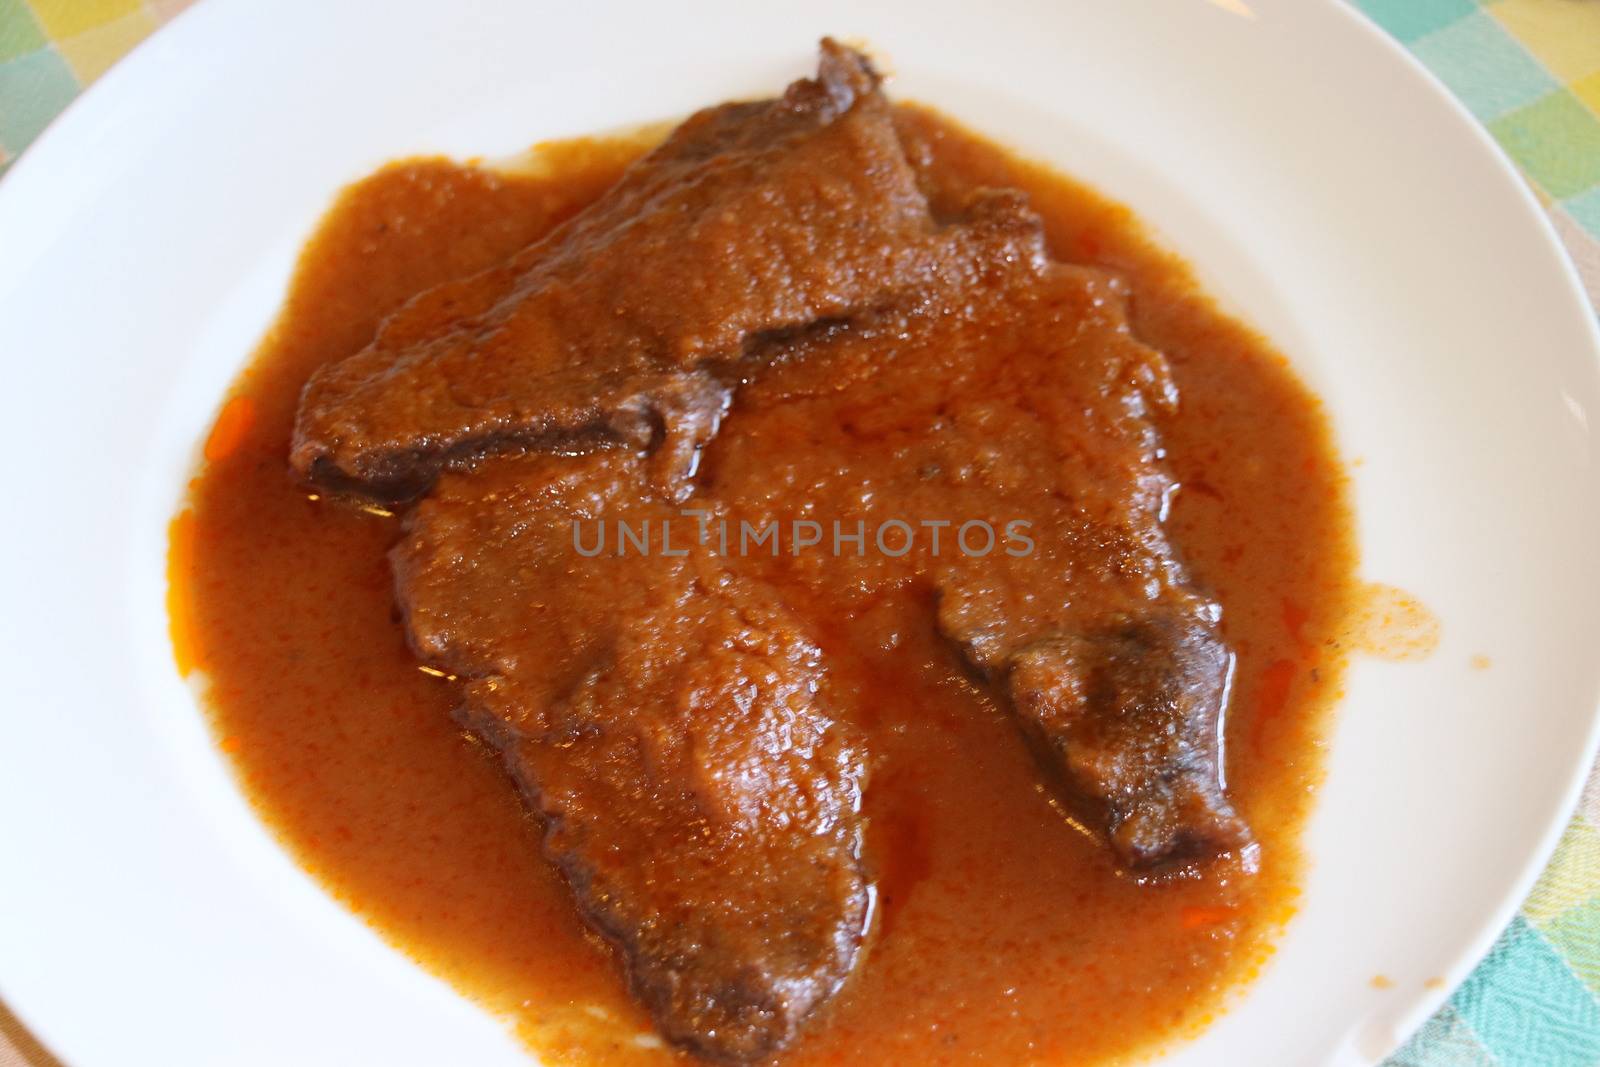 braised meat slices in the dish with sauce